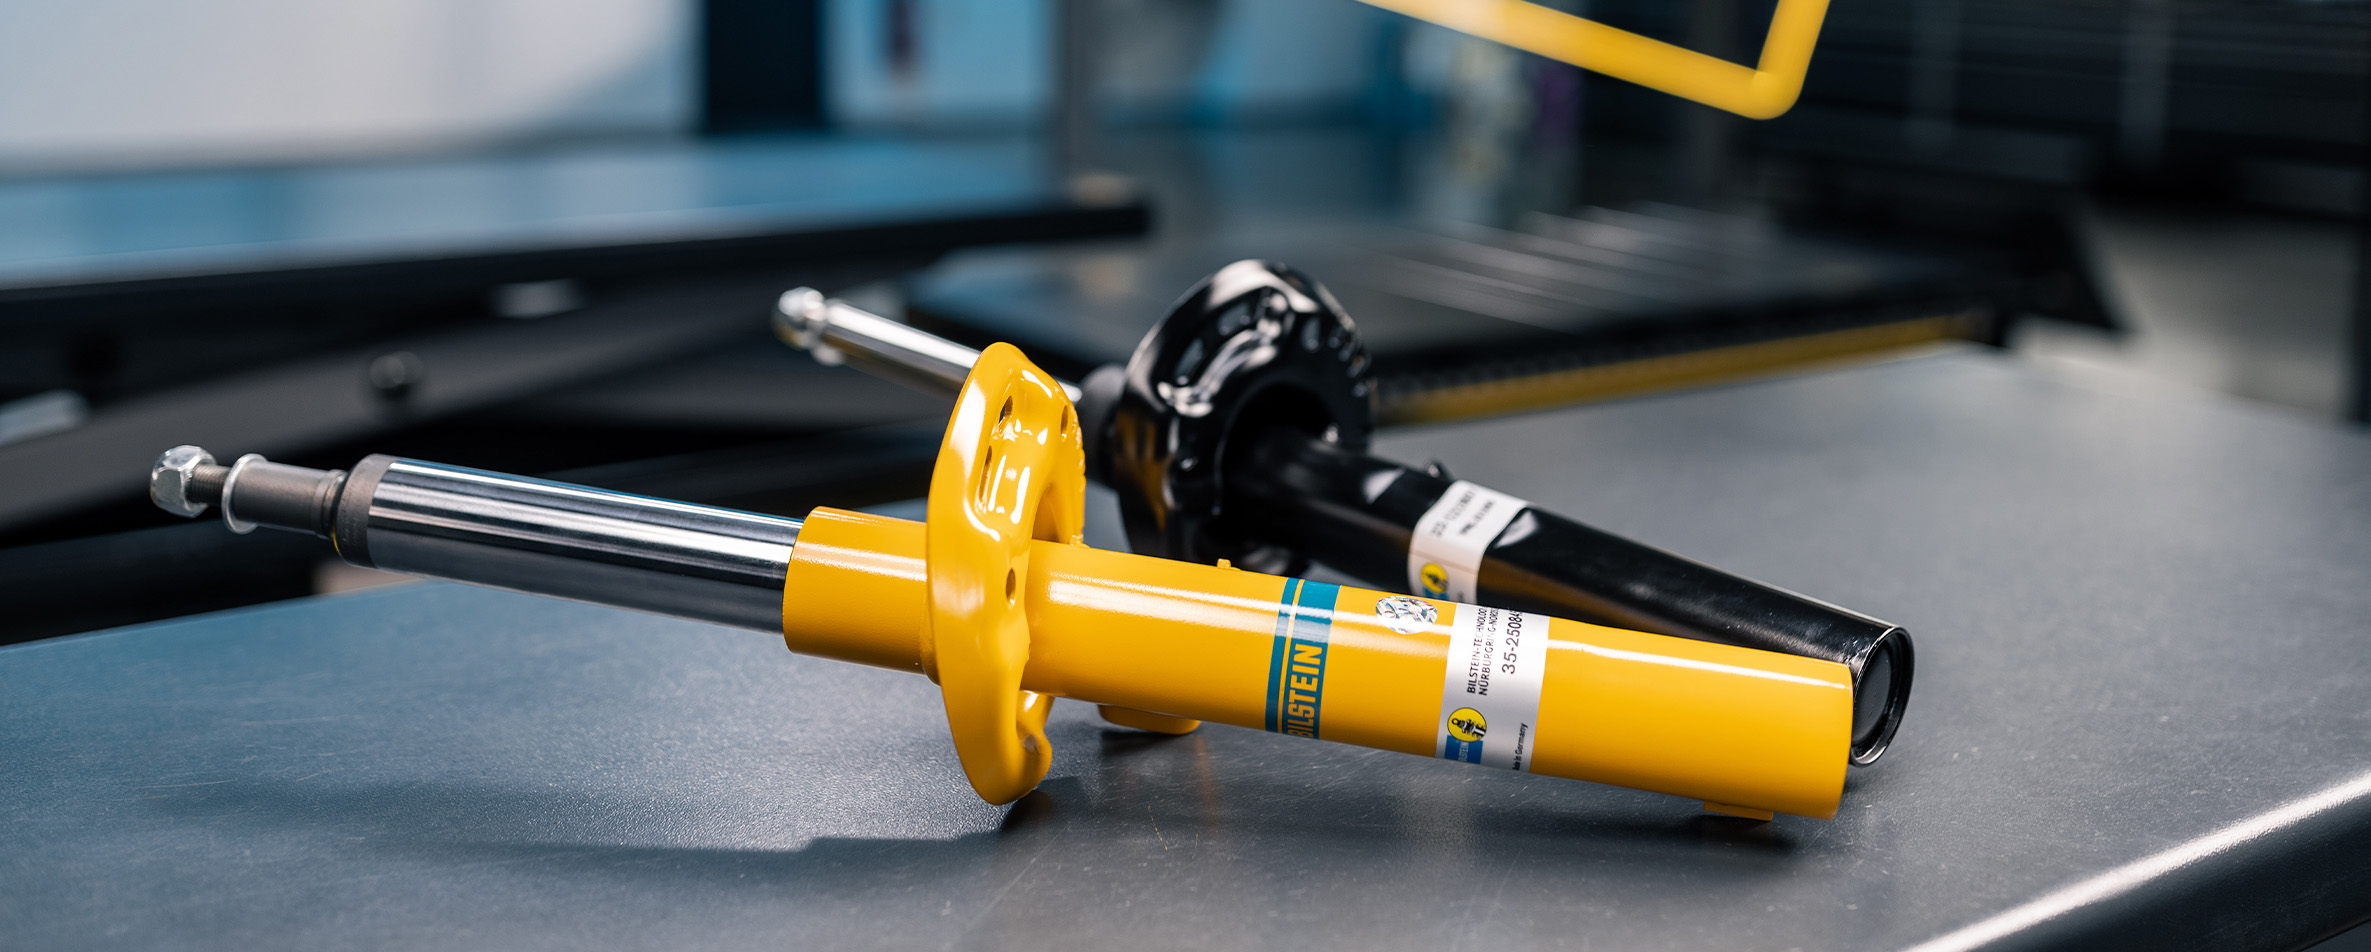 BILSTEIN B4, B6 or B8: Which is the right shock absorber?